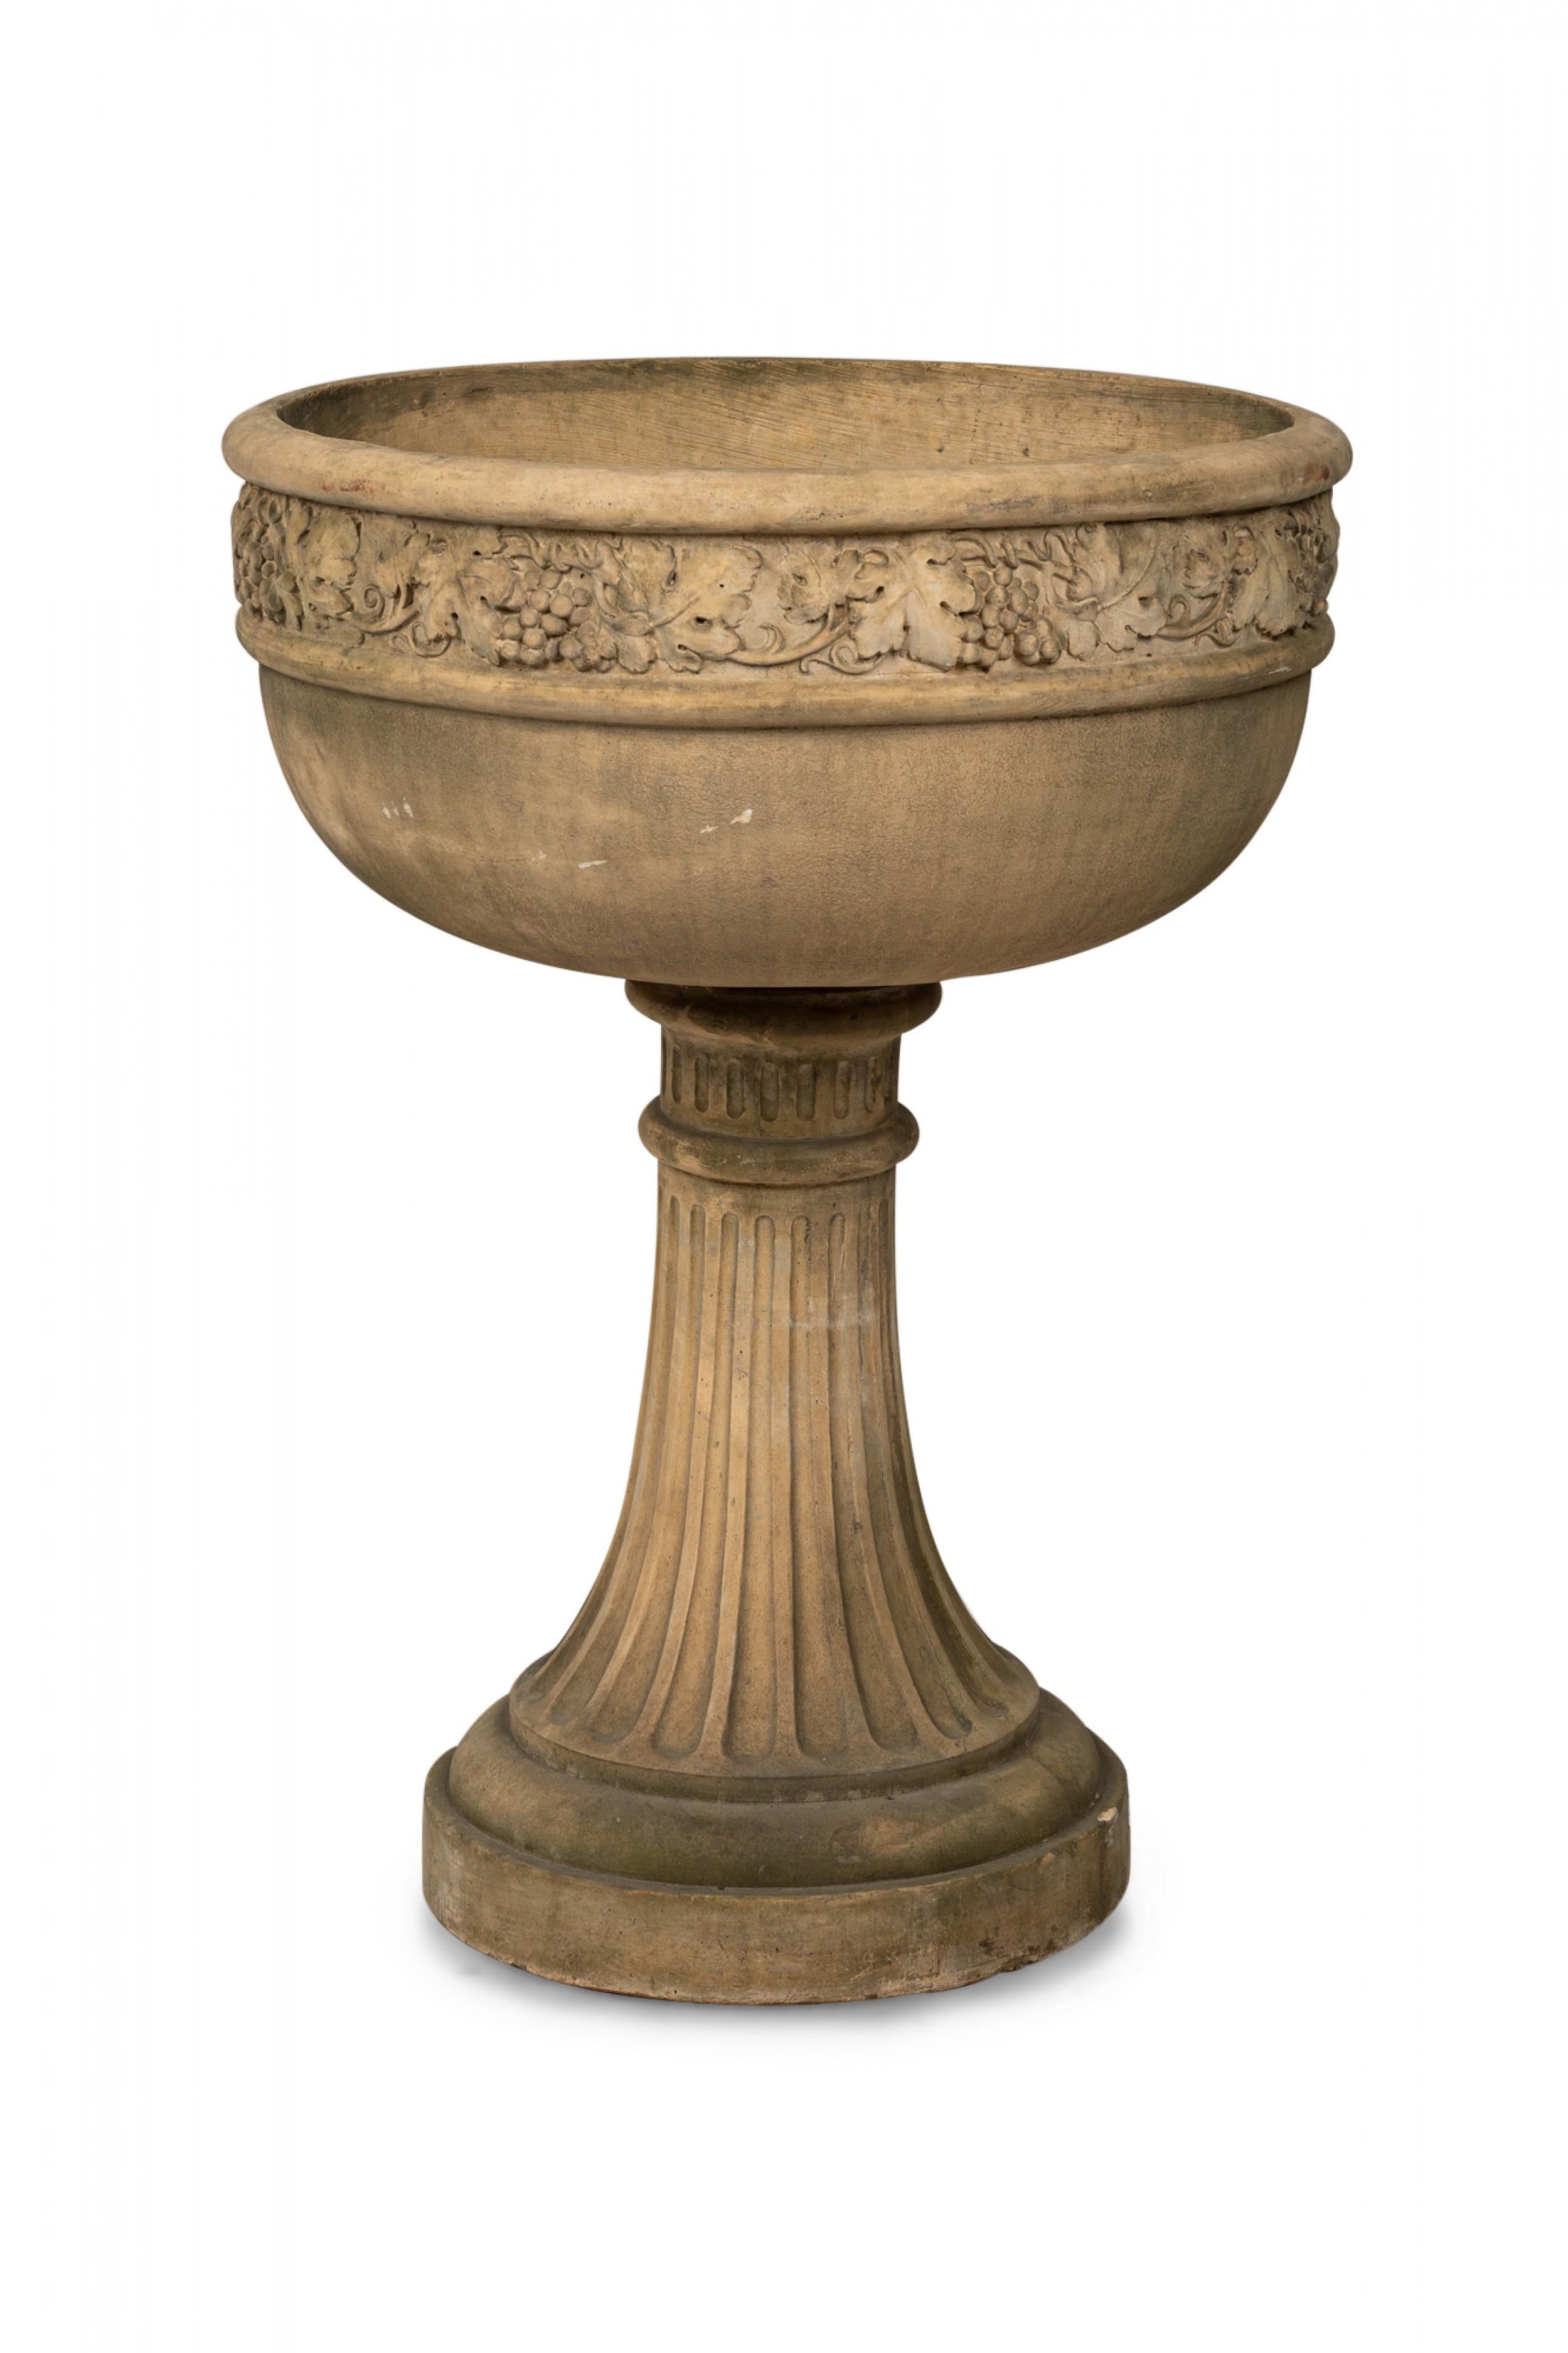 Pair of Contemporary (20th Century) large beige cast stone garden planters / outdoor urns with chalice form bowls featuring low relief decorative grapevine bands and drain holes to bowl, fitted on fluted circular bases.